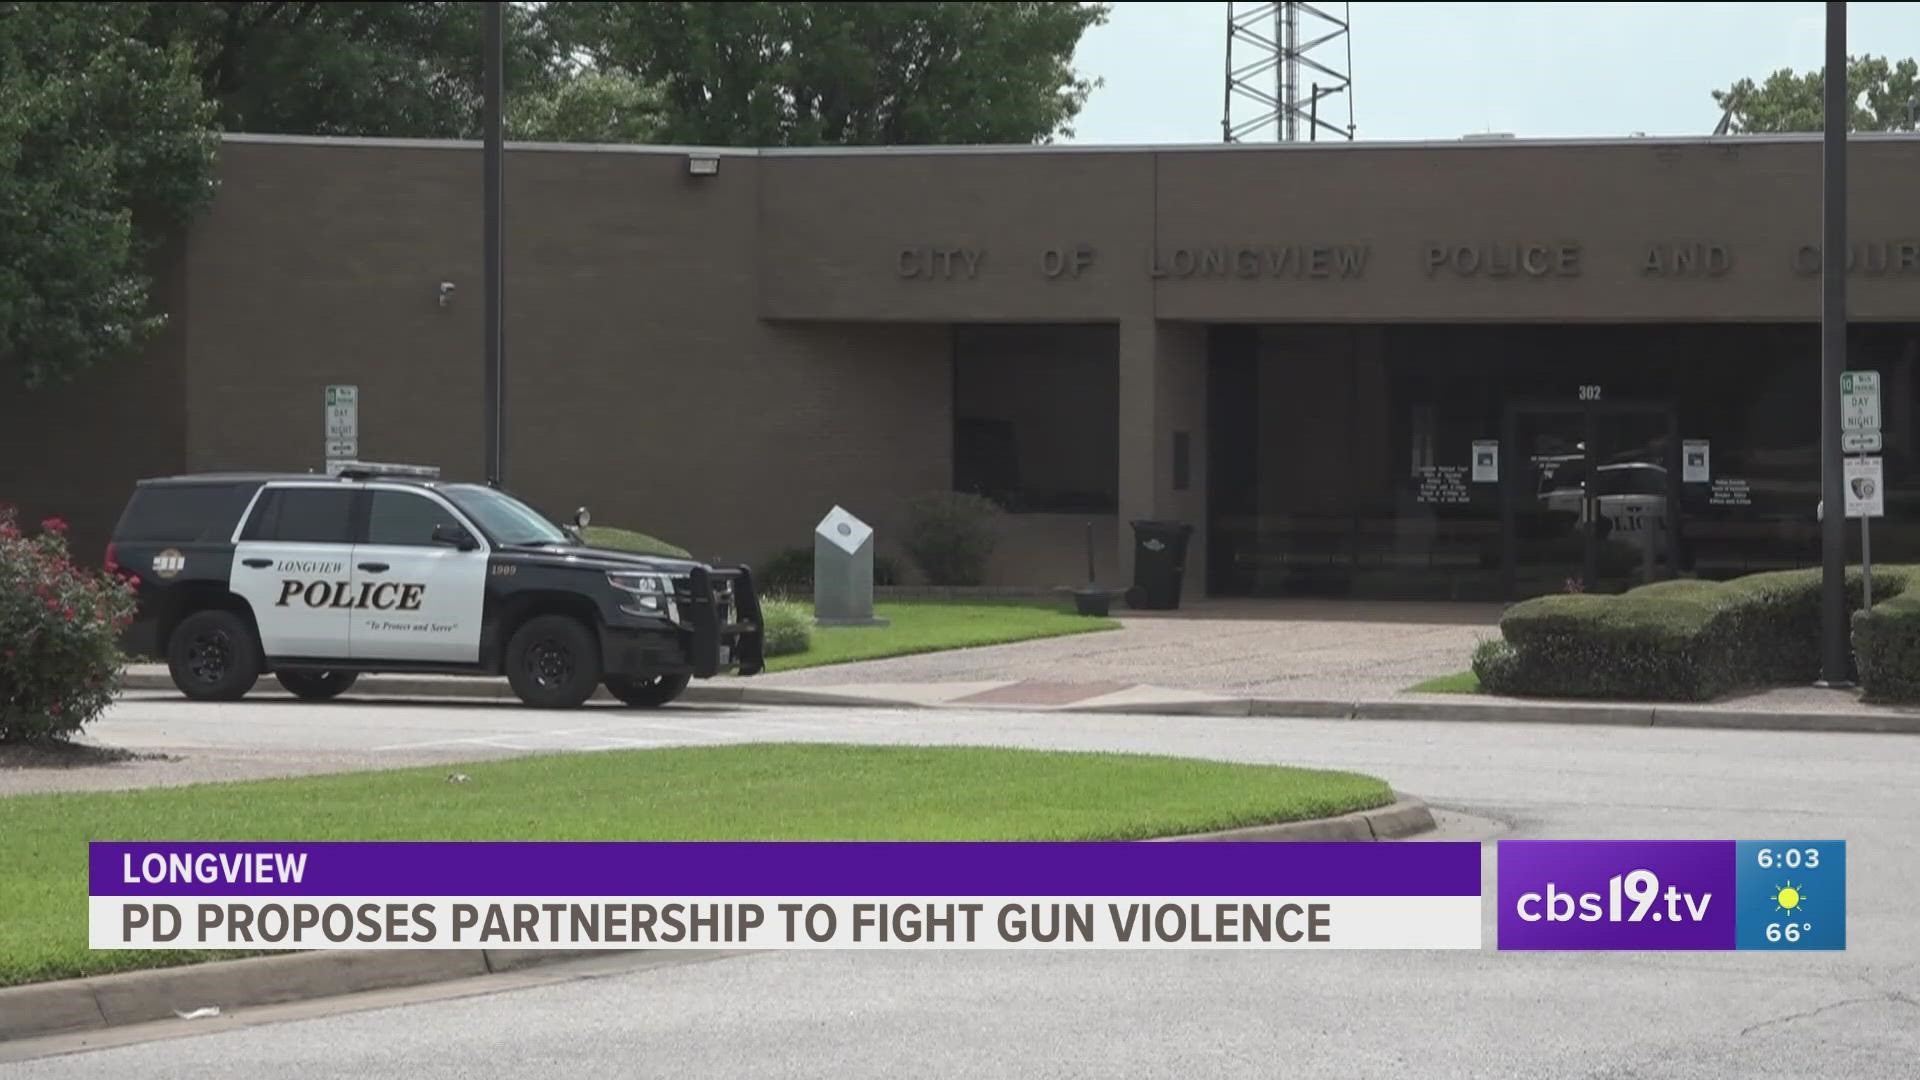 Joining the Deep East Texas Regional Violent Crime Task Force will allow Longview Police officers to go beyond the city borders to reduce gun violence.